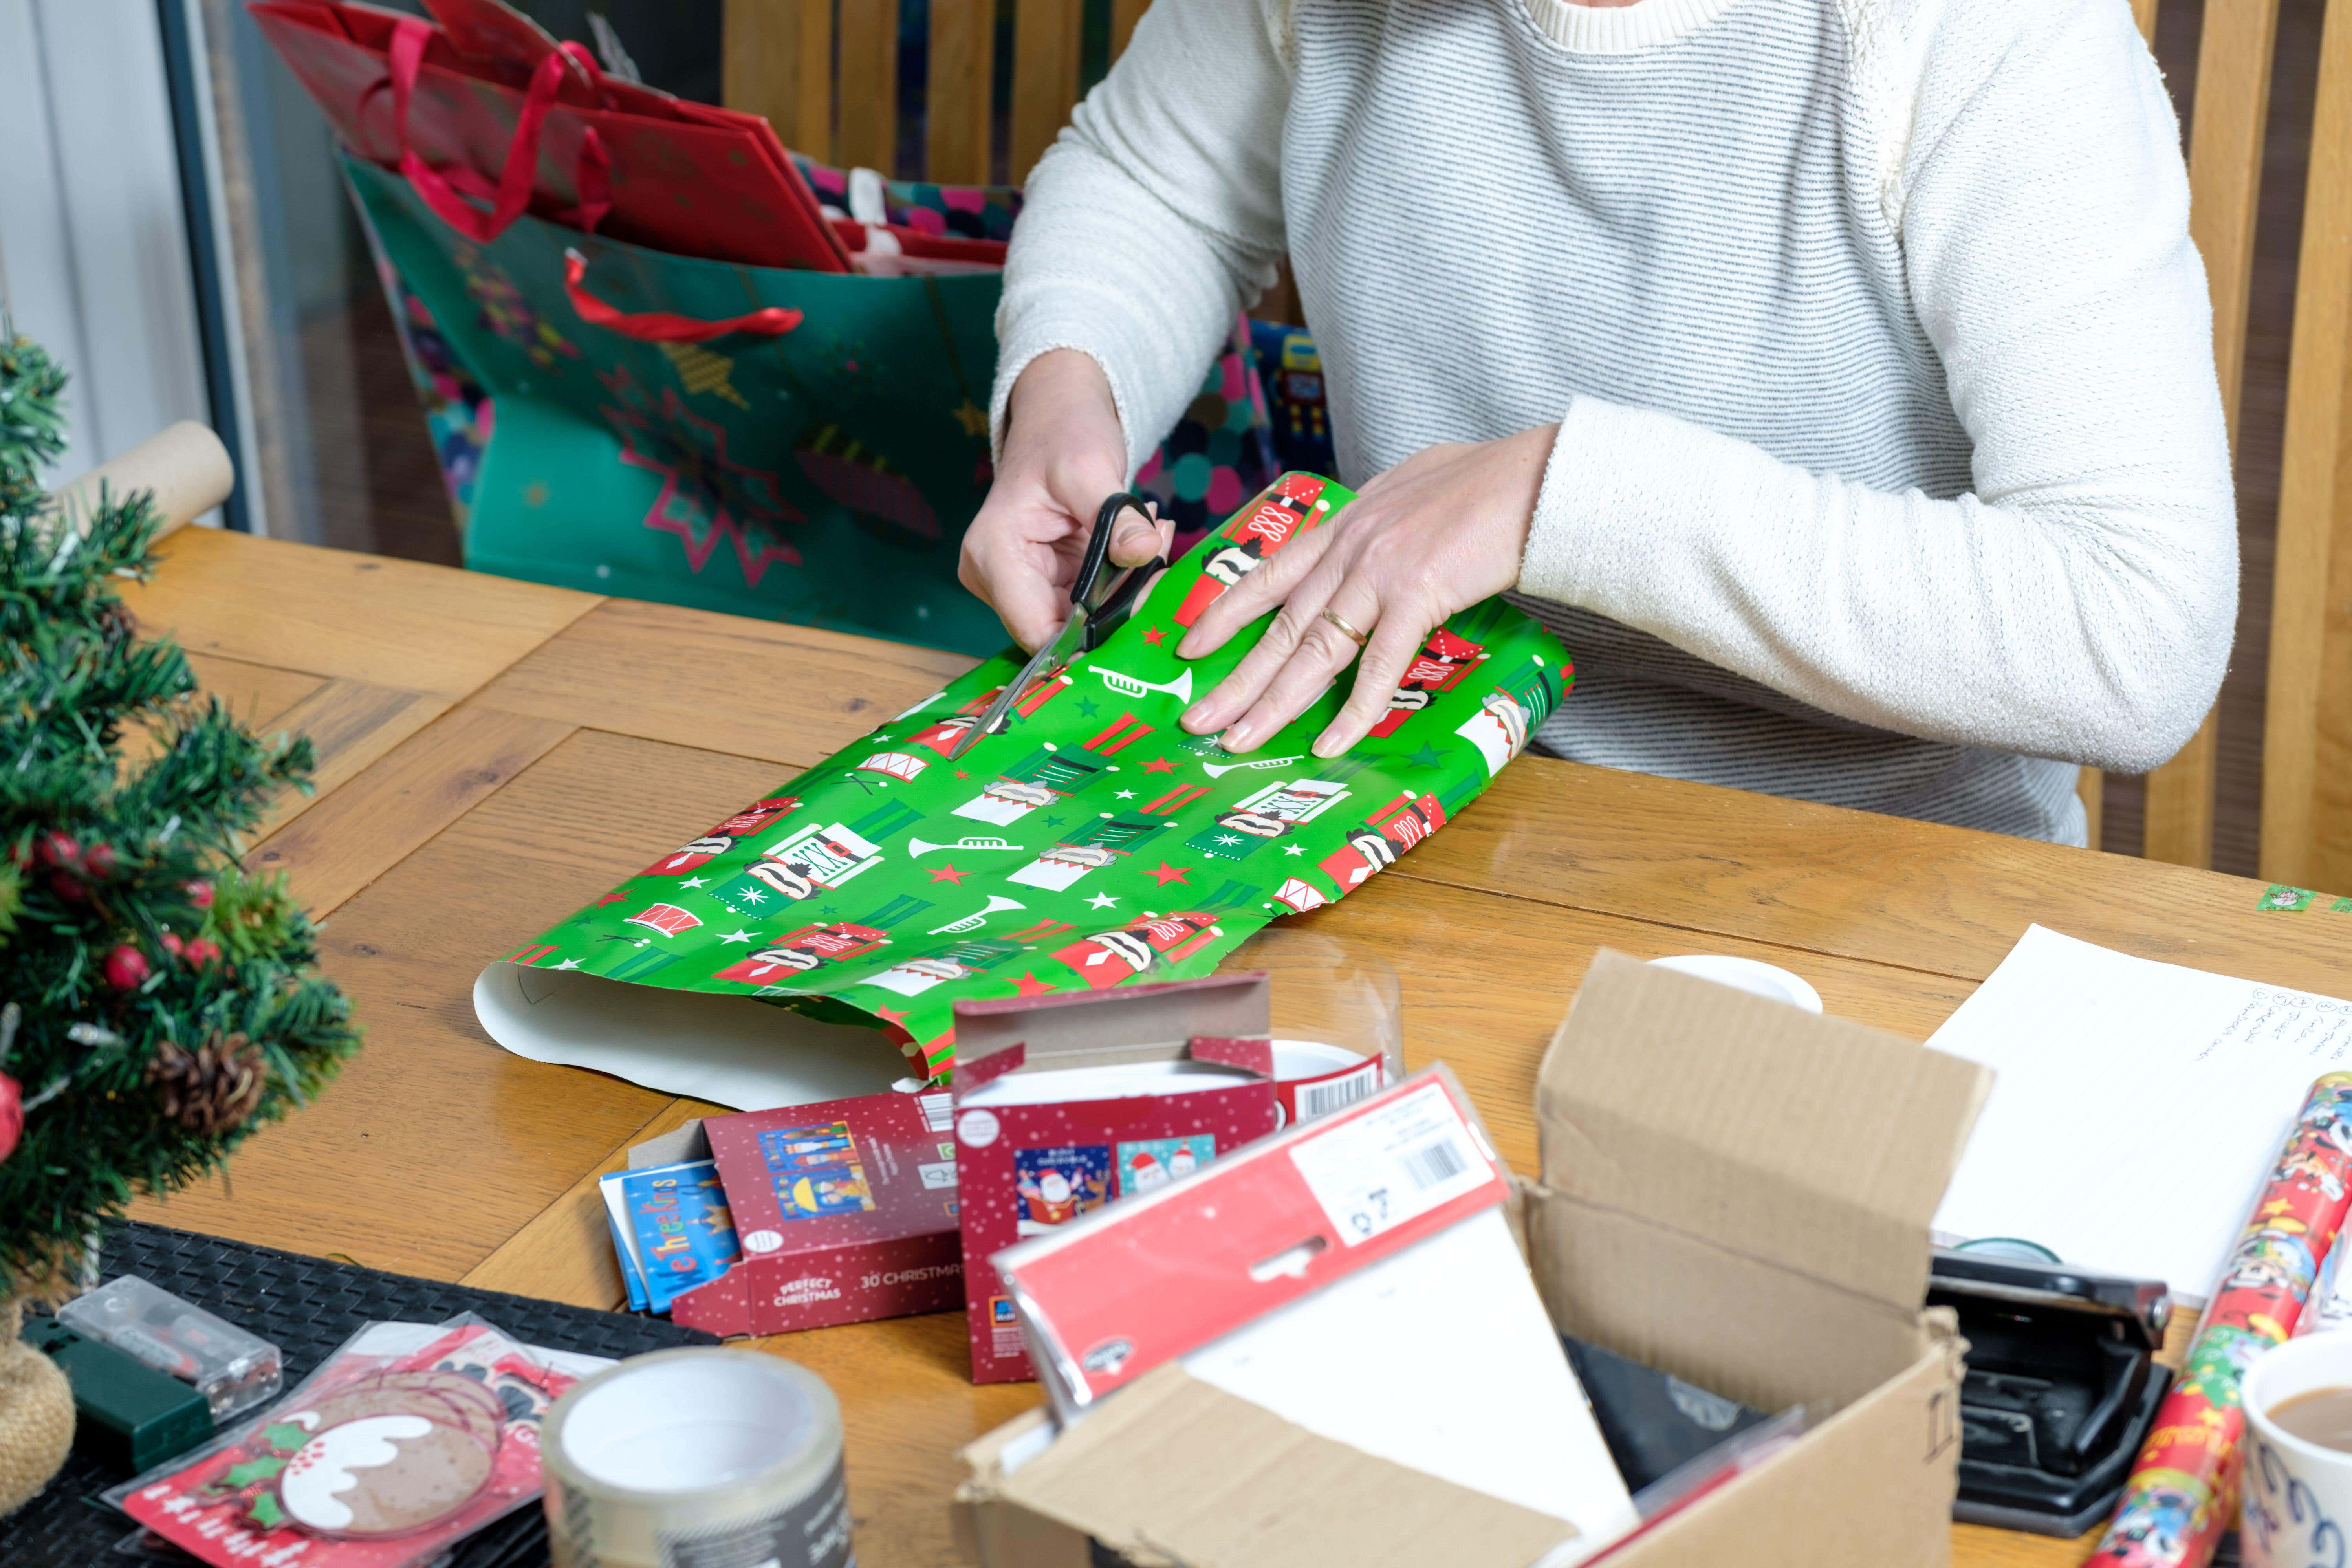 Sustainable ways to wrap Christmas gifts (Alamy/PA)